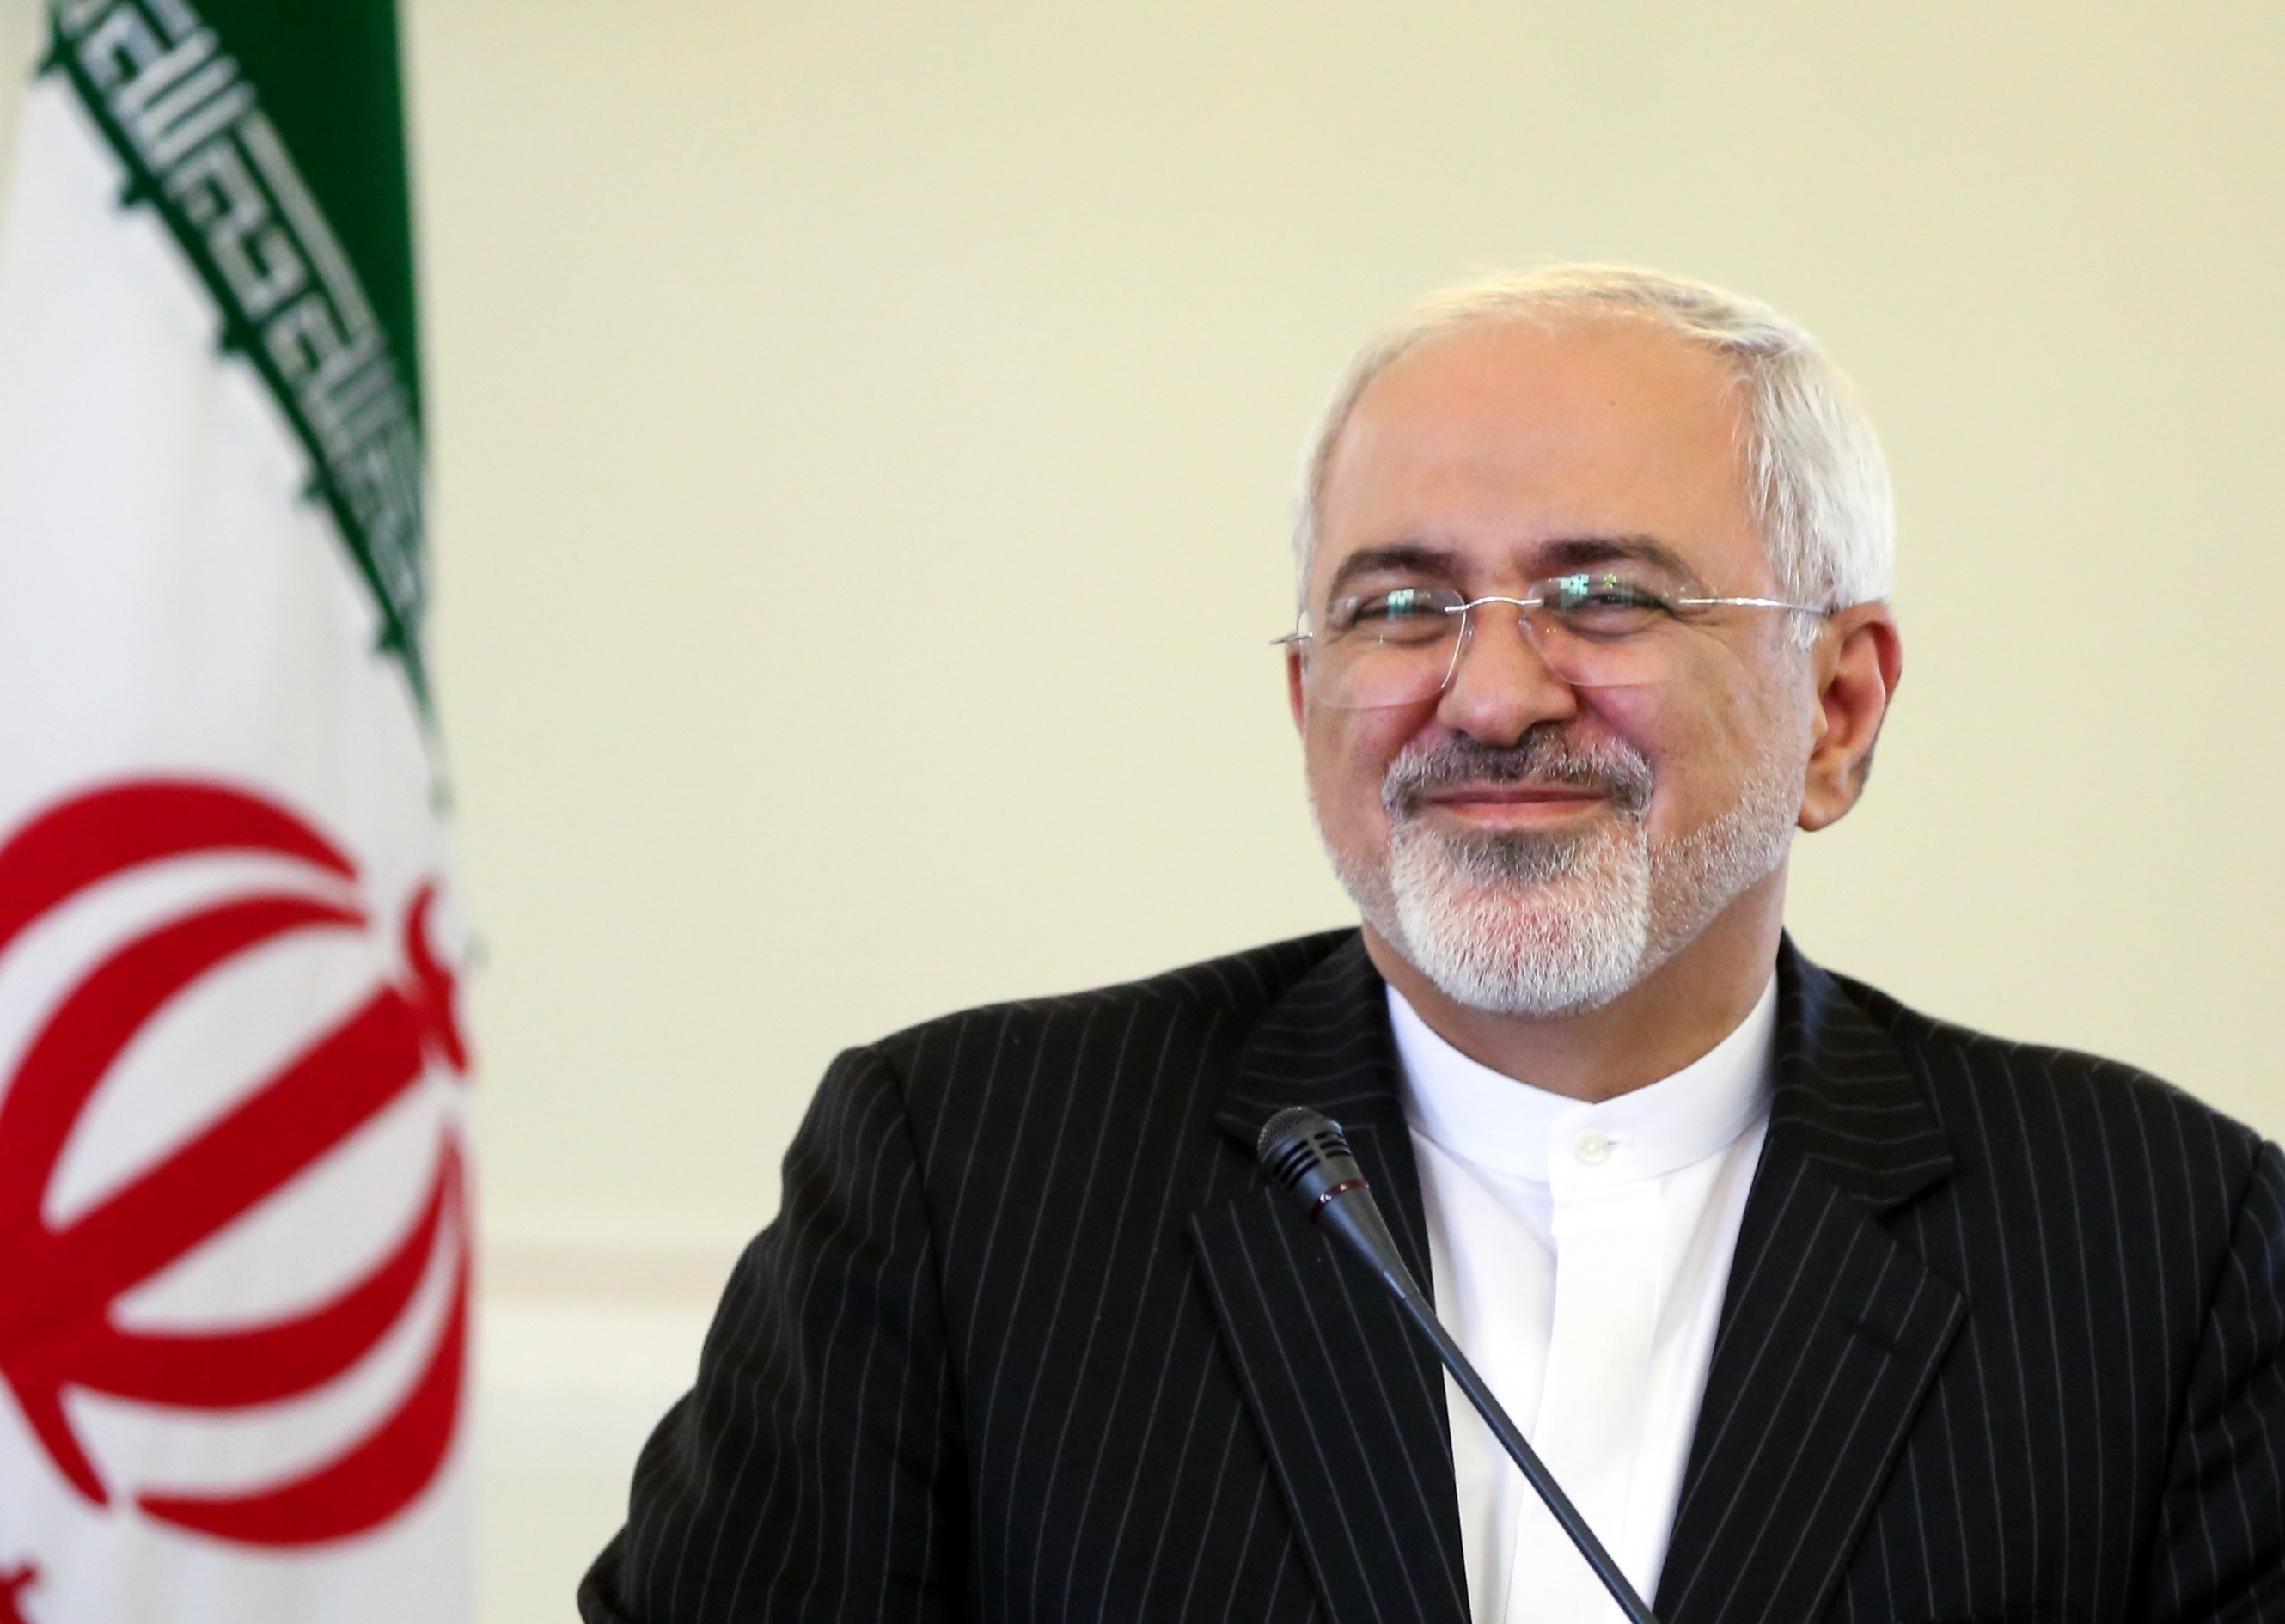 Iranian Foreign Minister Mohammad Javad Zarif is seen during a joint press conference with British Foreign Minister Philip Hammond (not seen) at Foreign Ministry in Tehran, Iran on August 23, 2015.